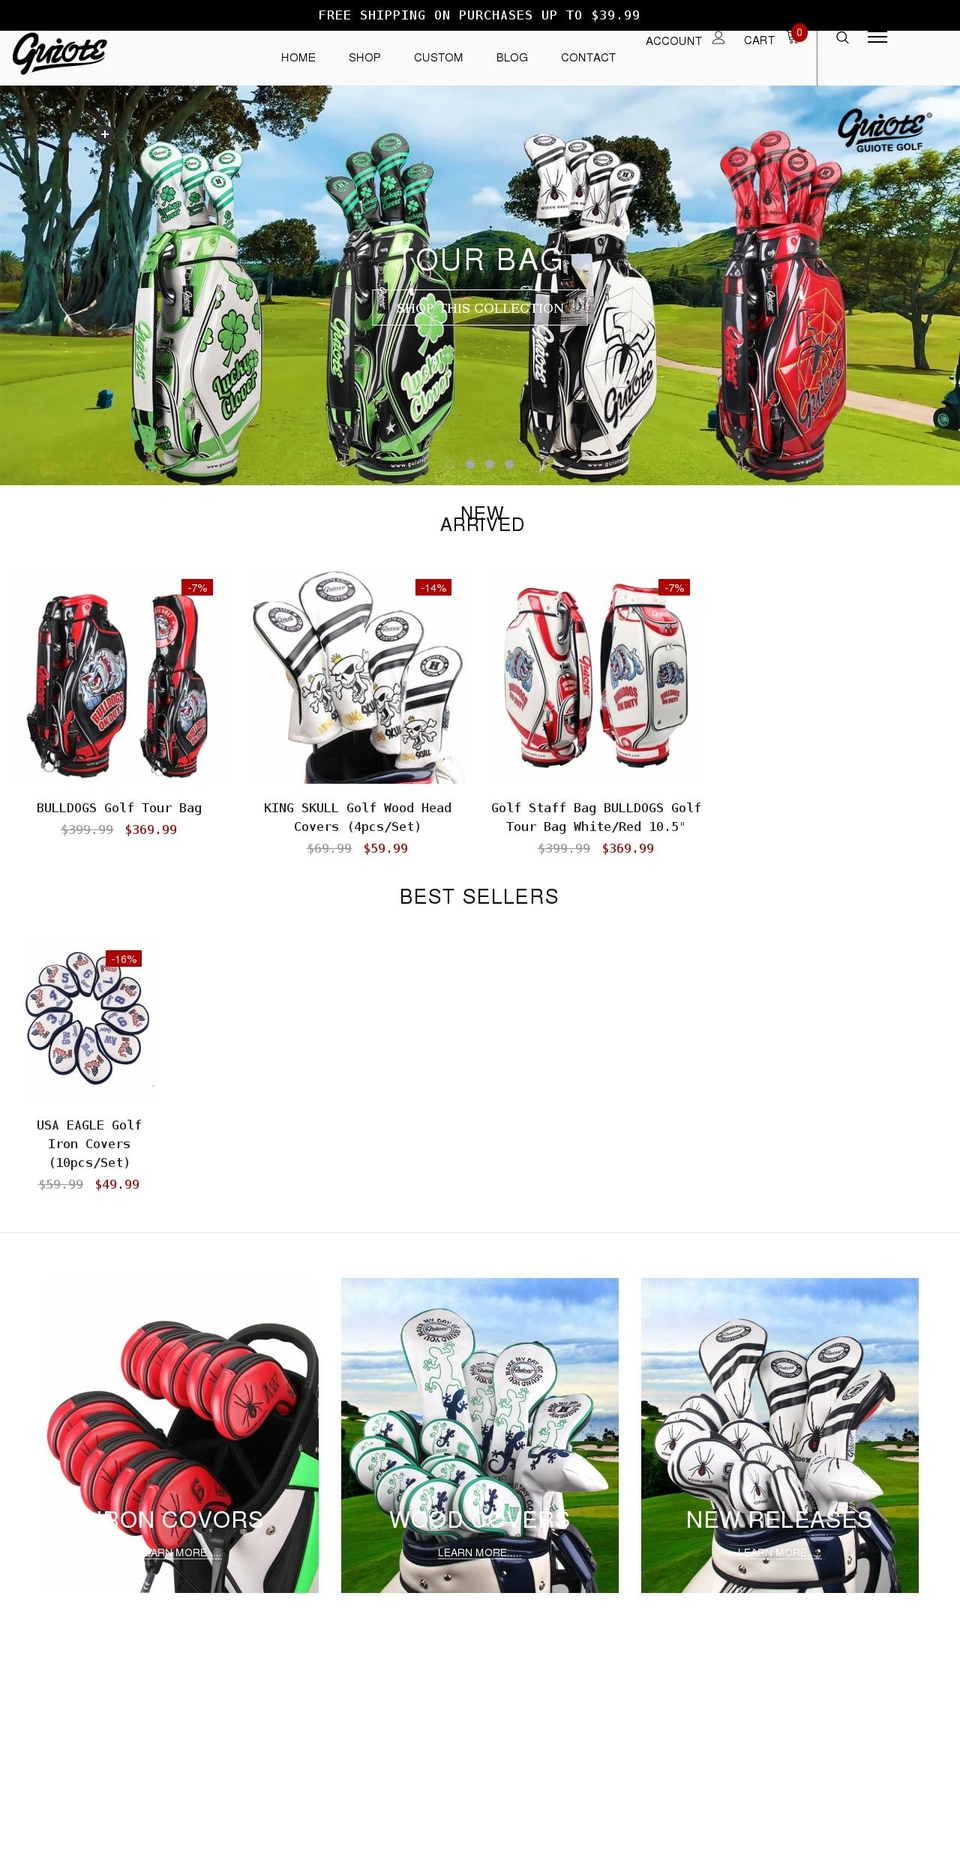 WATCHES Shopify theme site example guiotegolf.com